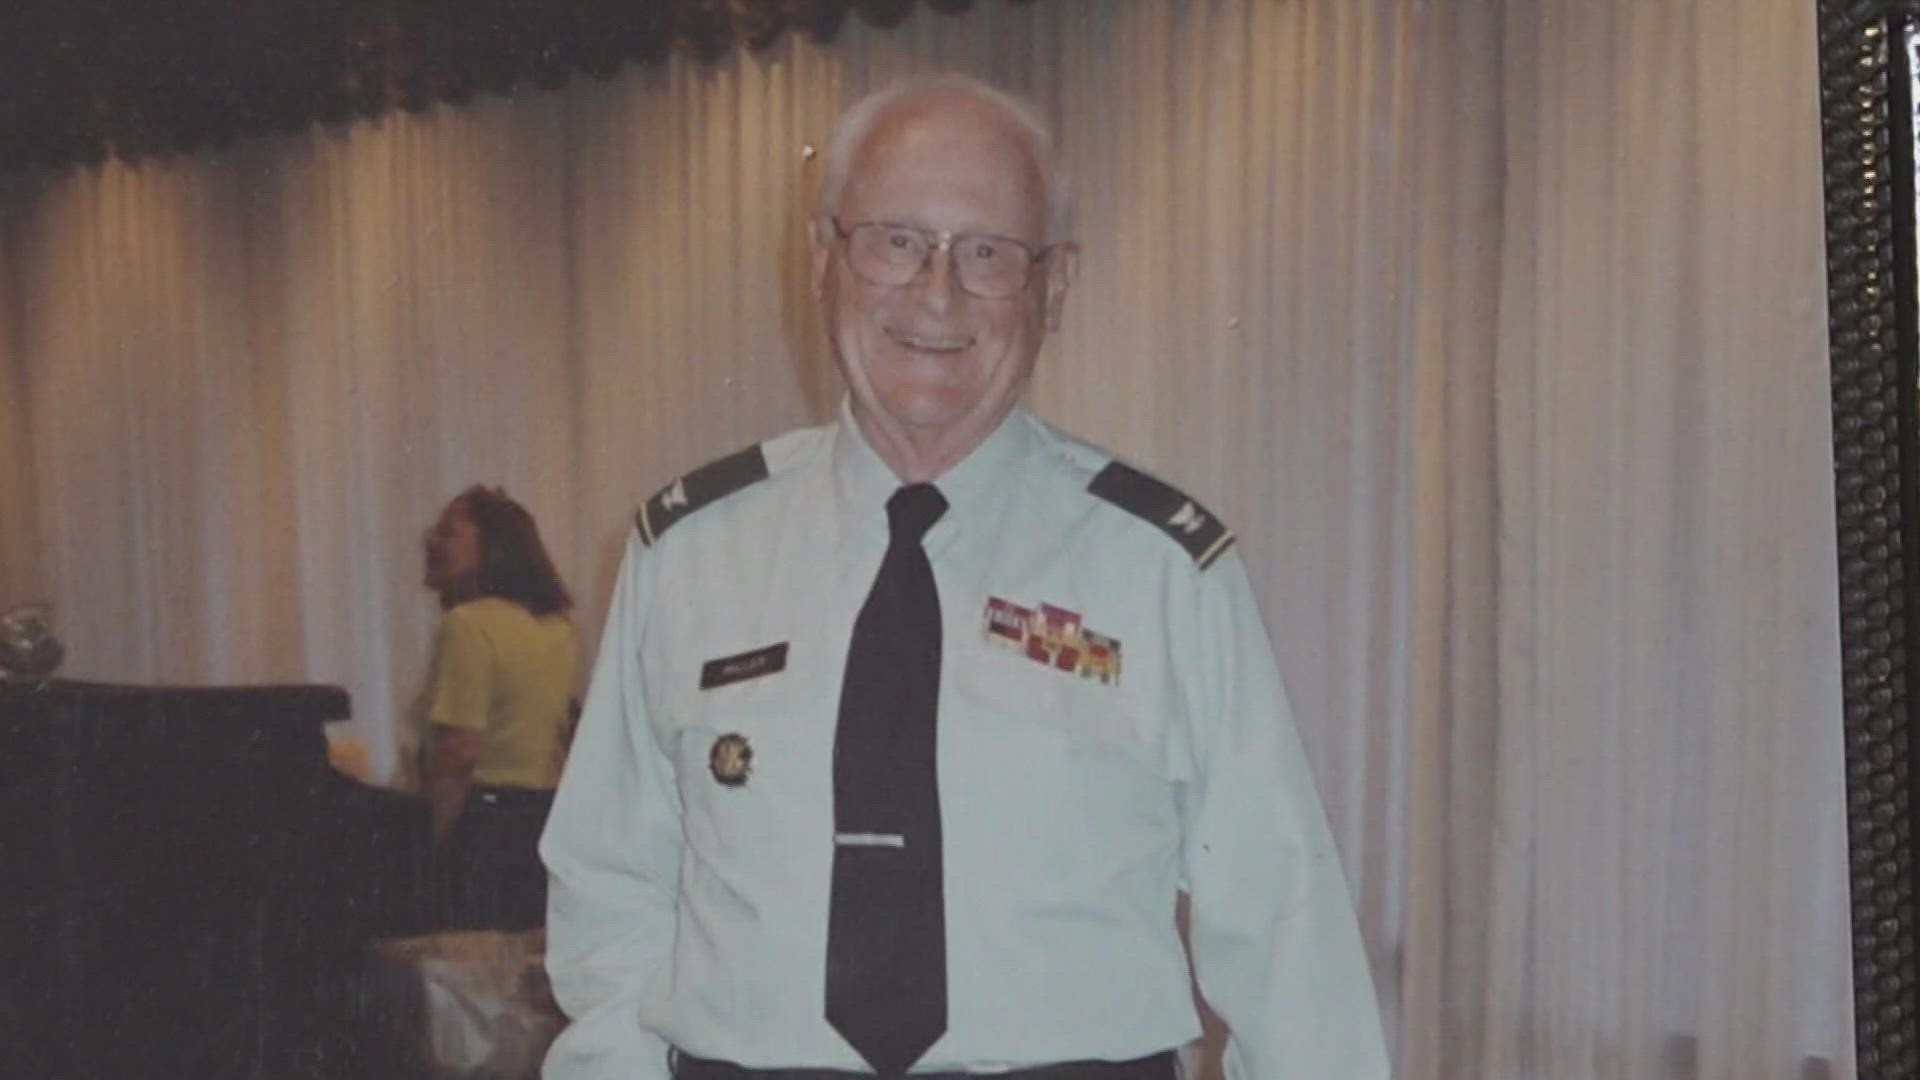 A 95-year-old veteran is writing his autobiography, including discussions about his military career that spanned more than 40 years.